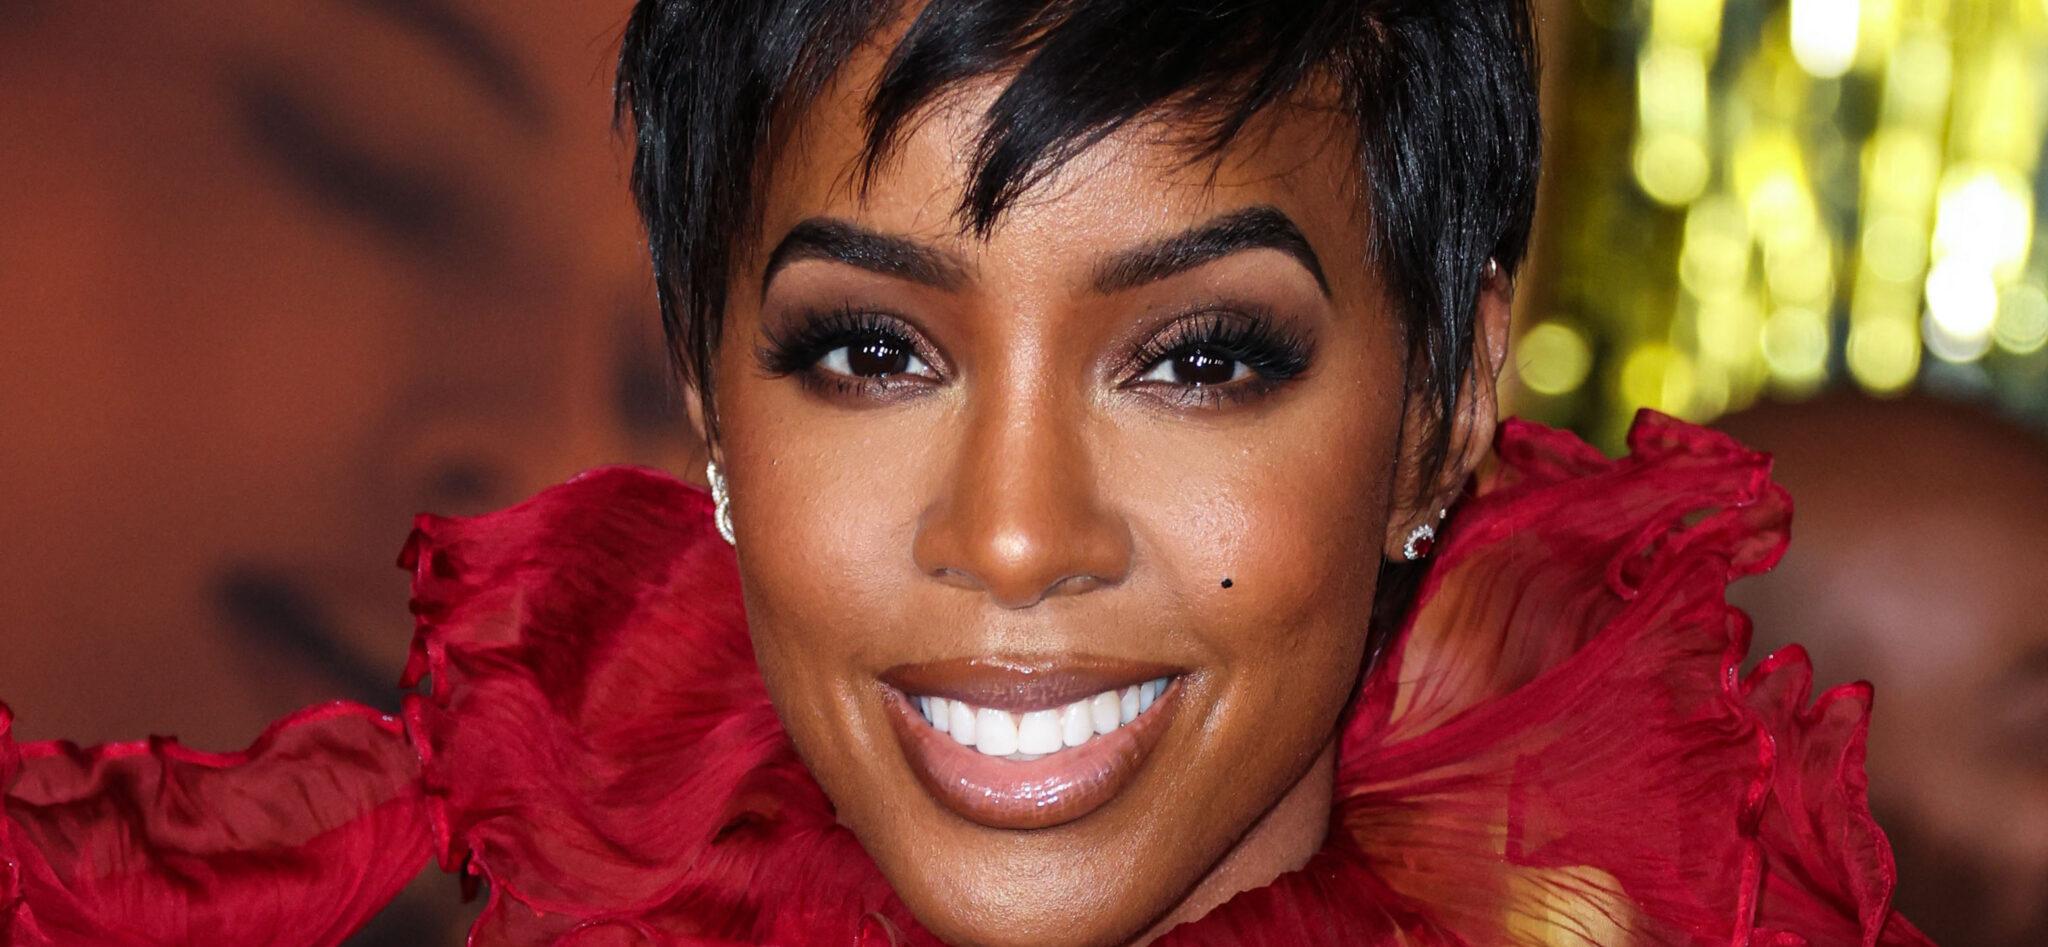 The Reason Why Kelly Rowland Abruptly Walked Off The ‘Today’ Show